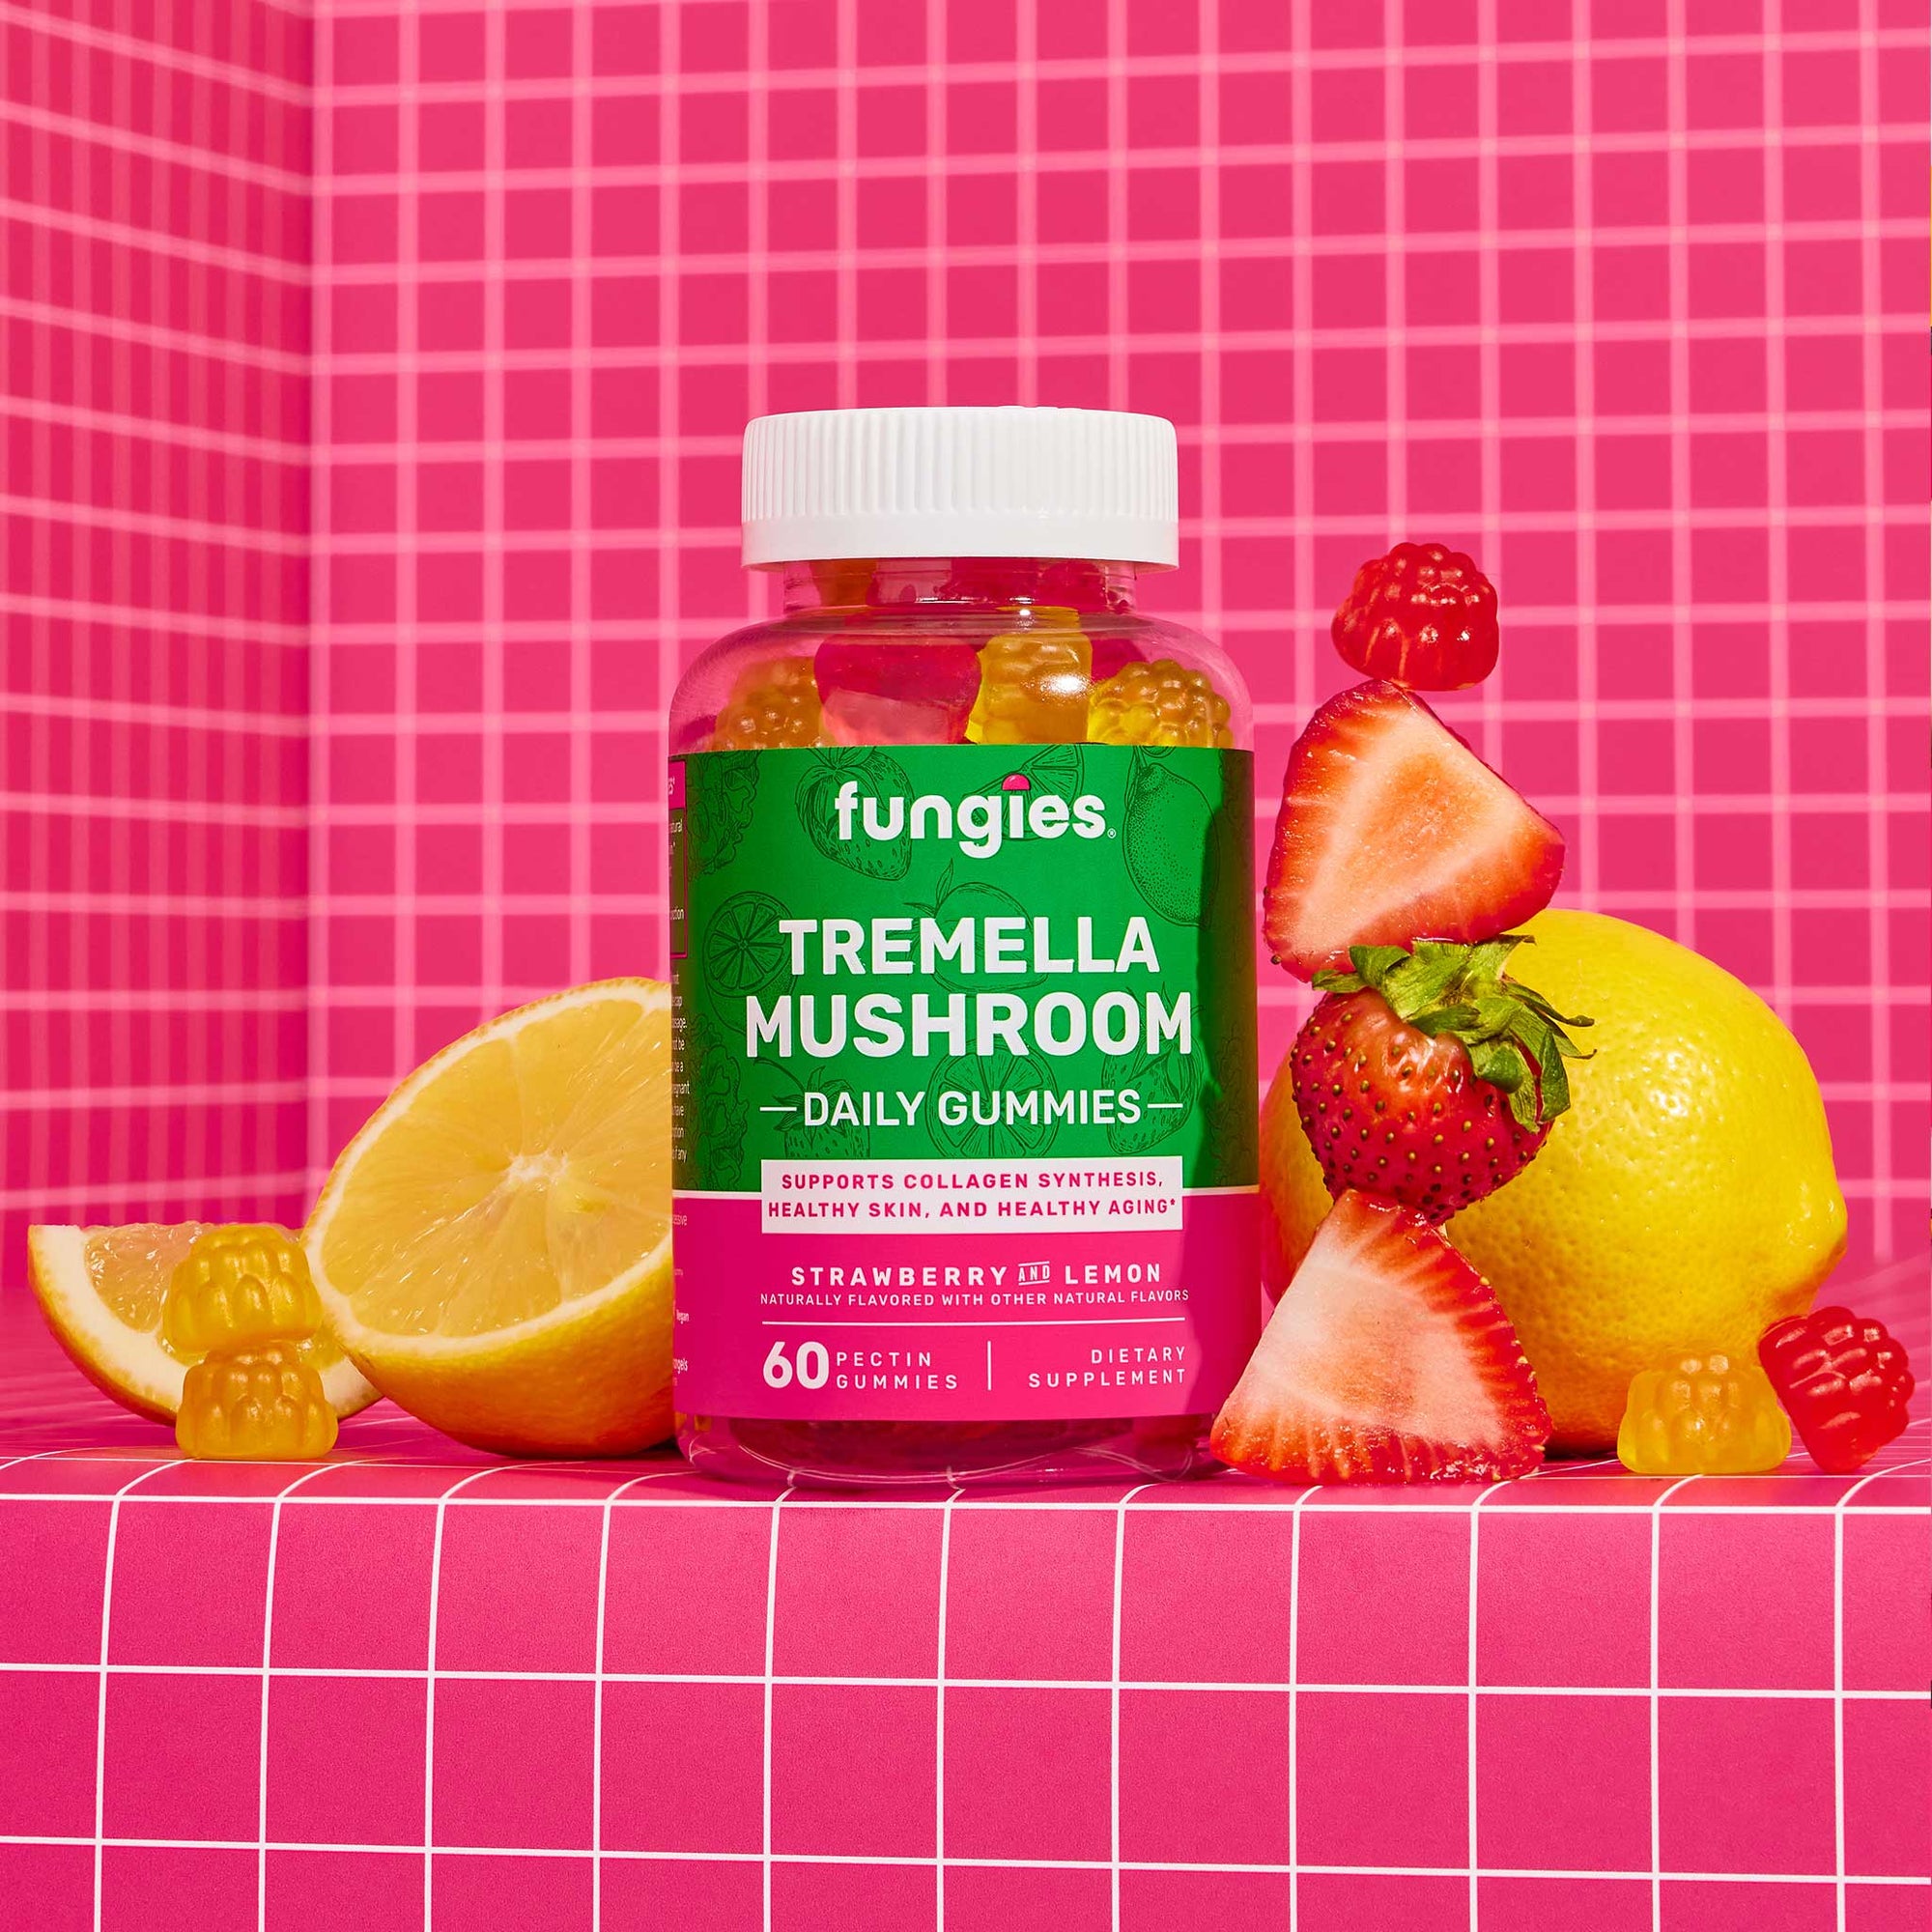 Fungies Tremella Mushroom Daily Gummies with natural lemon and strawberry flavor